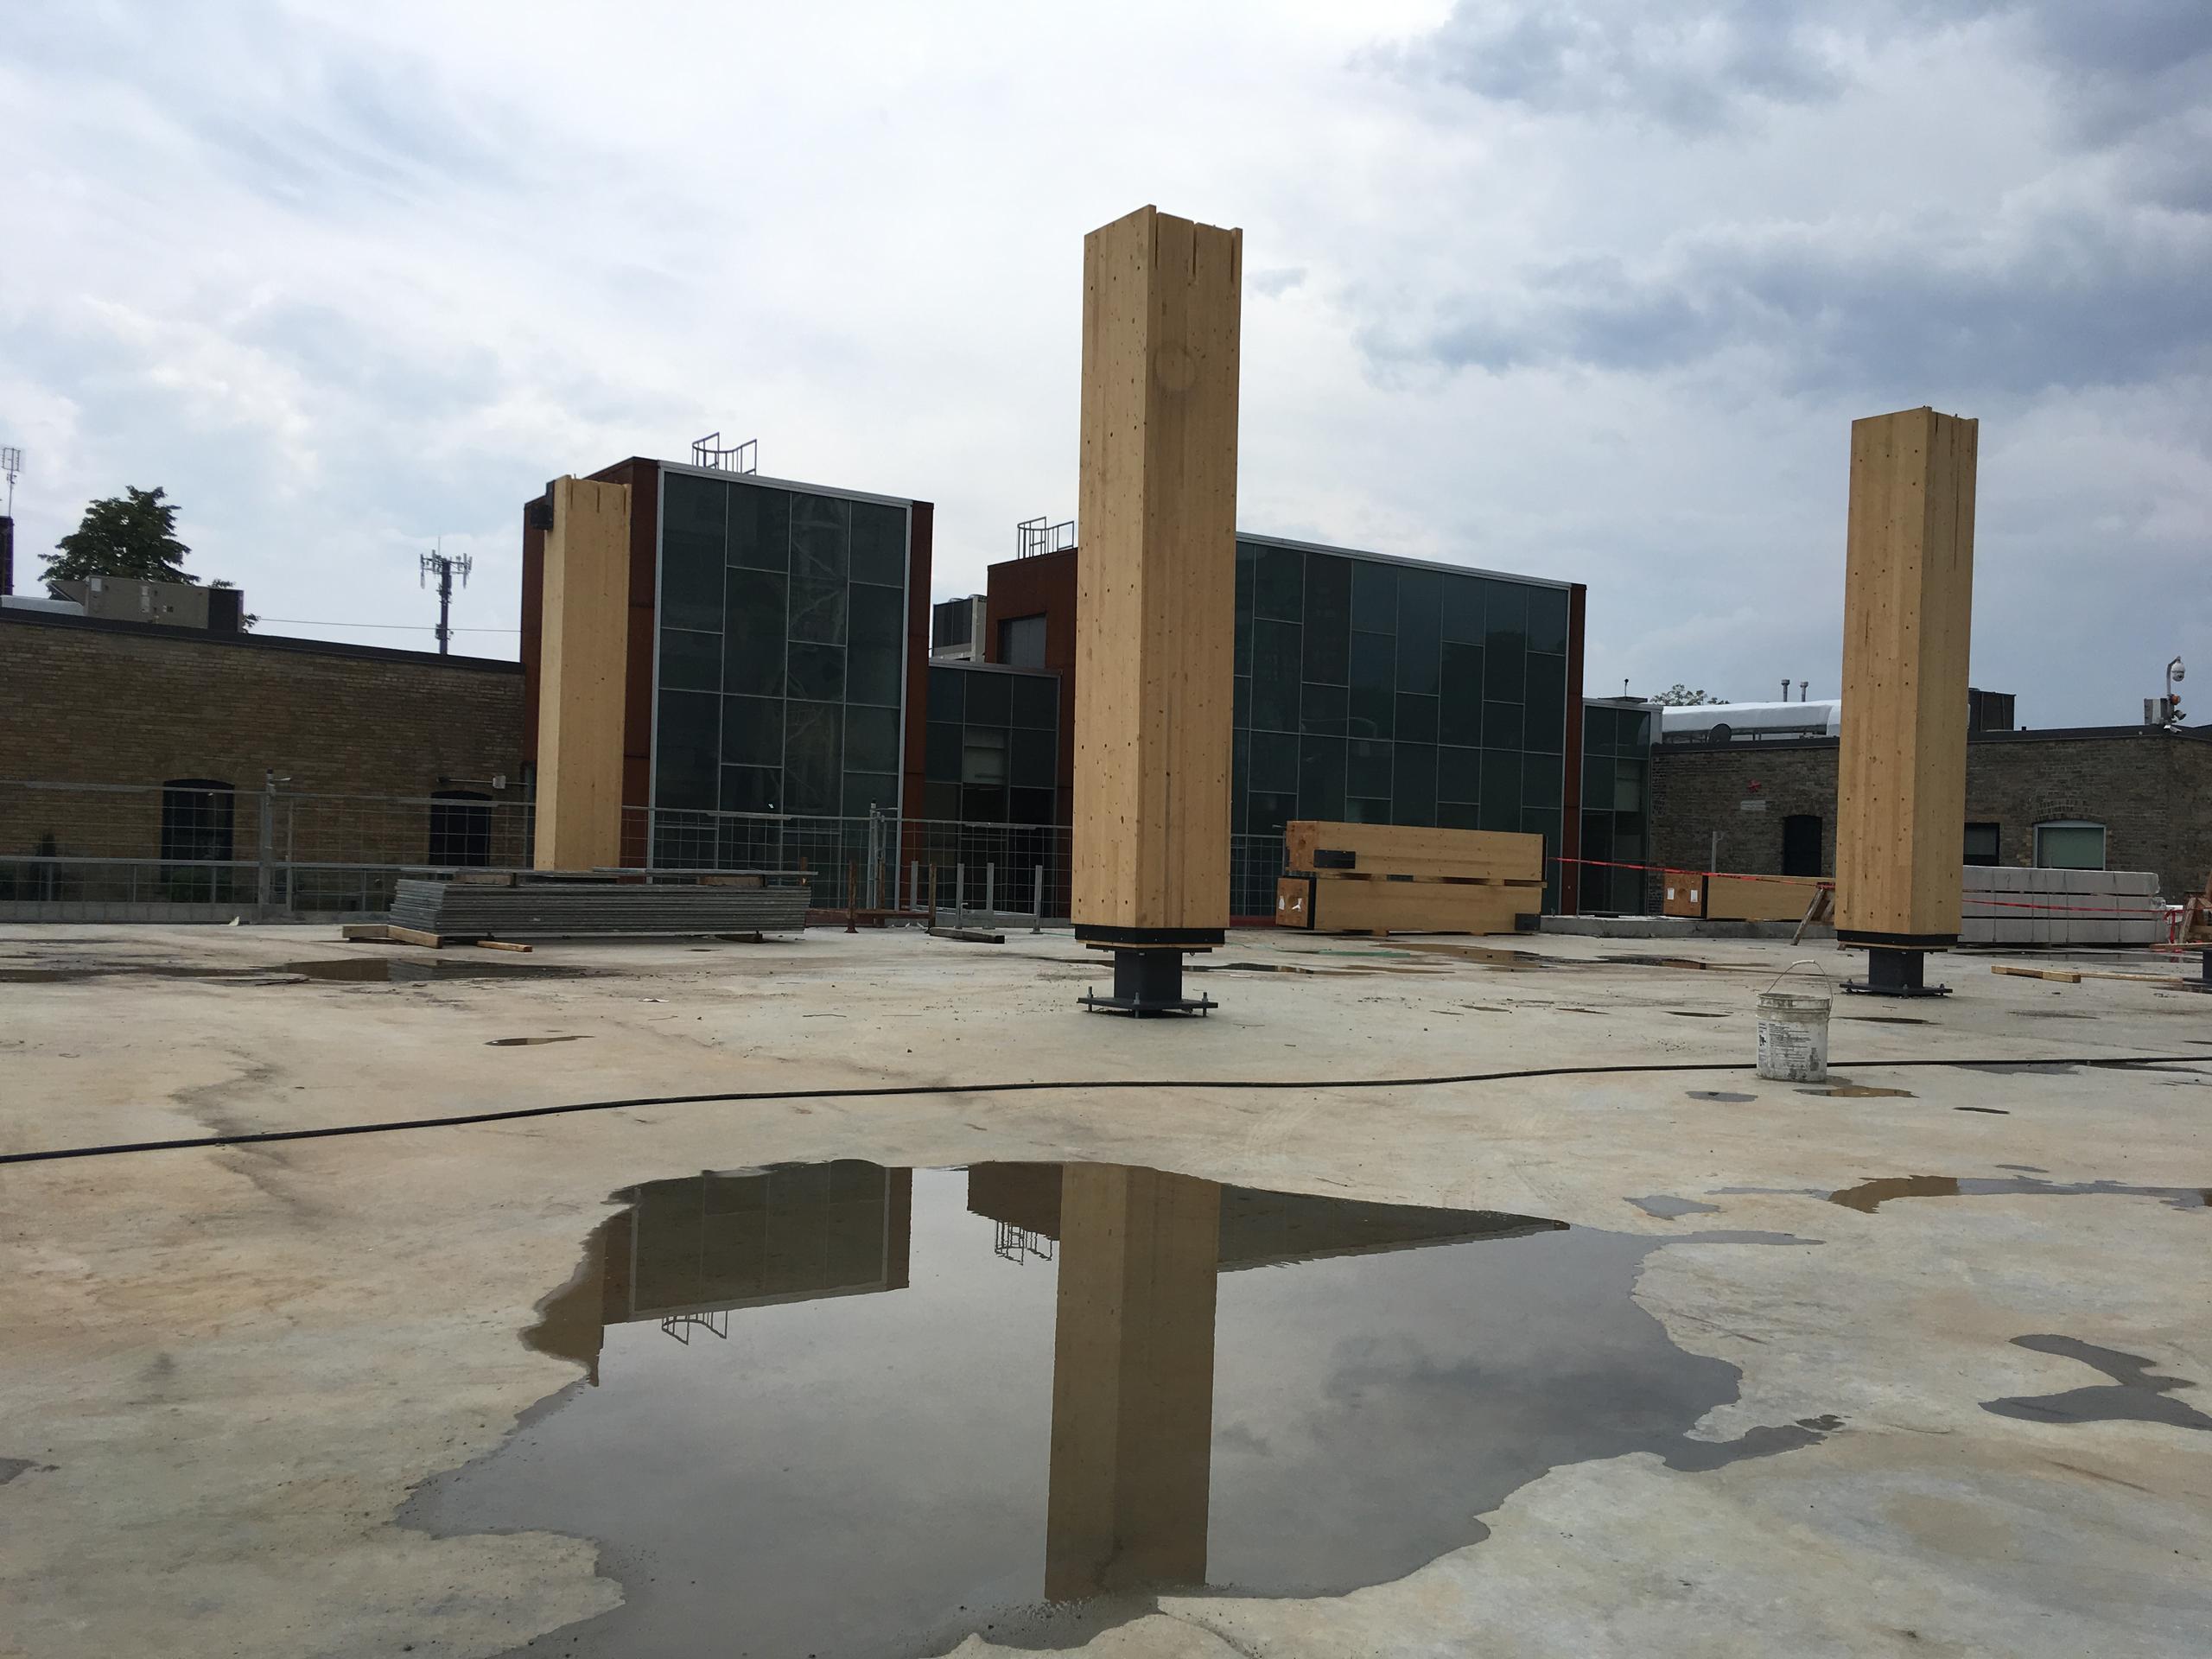 glulam columns, some installed upright and some laid flat, reflected in a puddle in the foreground and with 60 Atlantic visible in the background